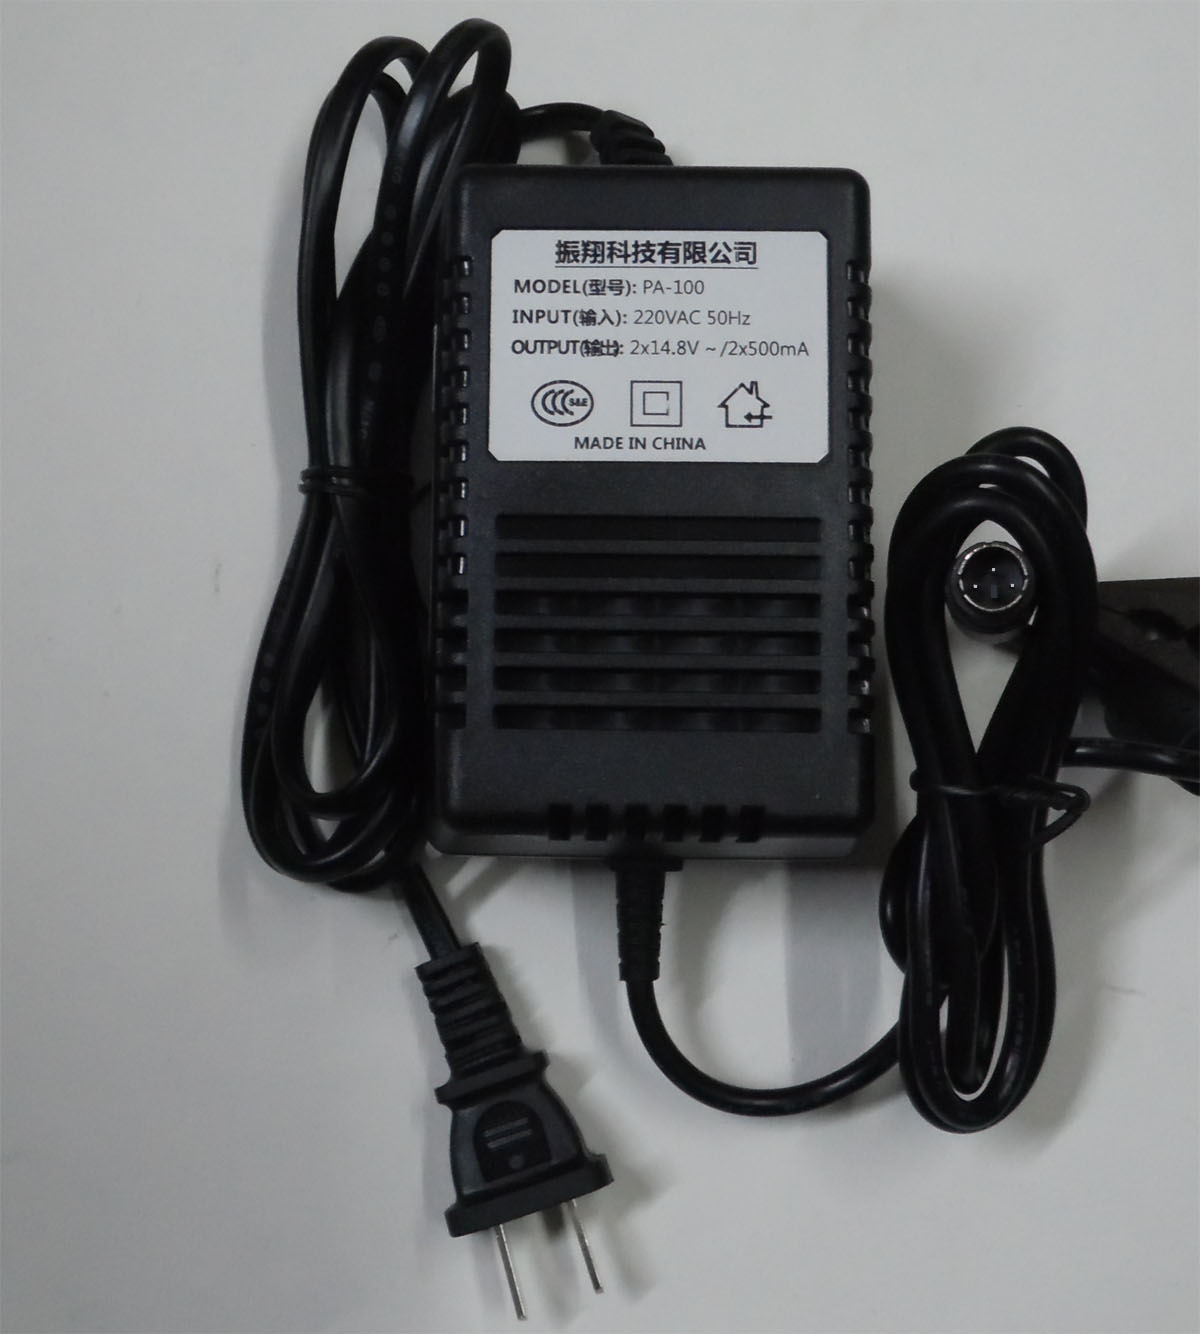 Behringer New XENYX1002FX 1202FX PA-100 220VAC 50Hz AC/DC POWER SUPPLY ADAPTER